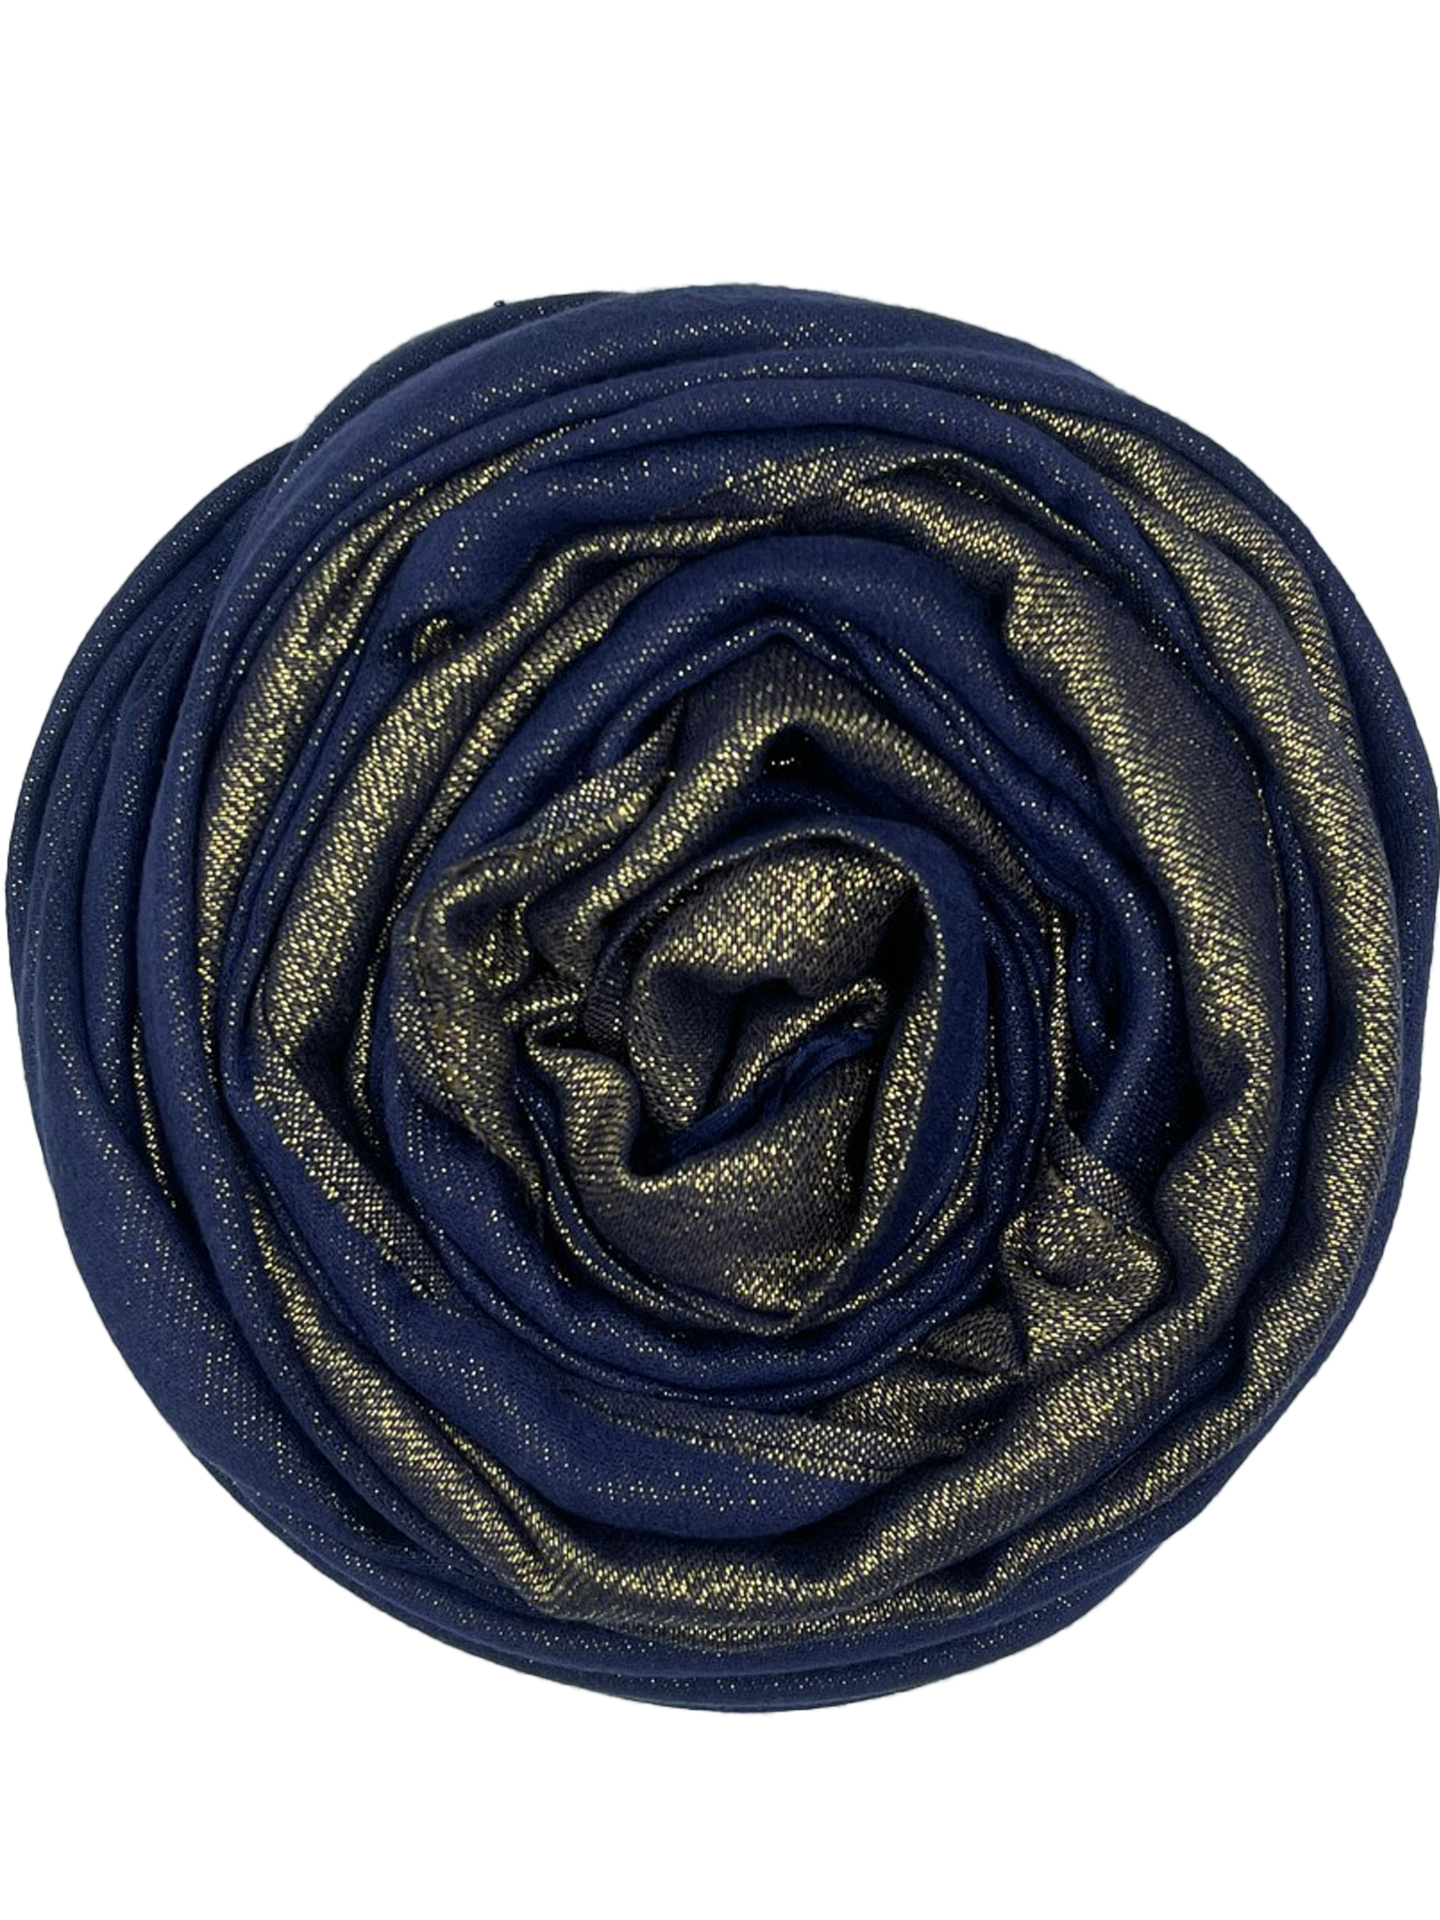 Glamour Scarf - Darkblue with gold